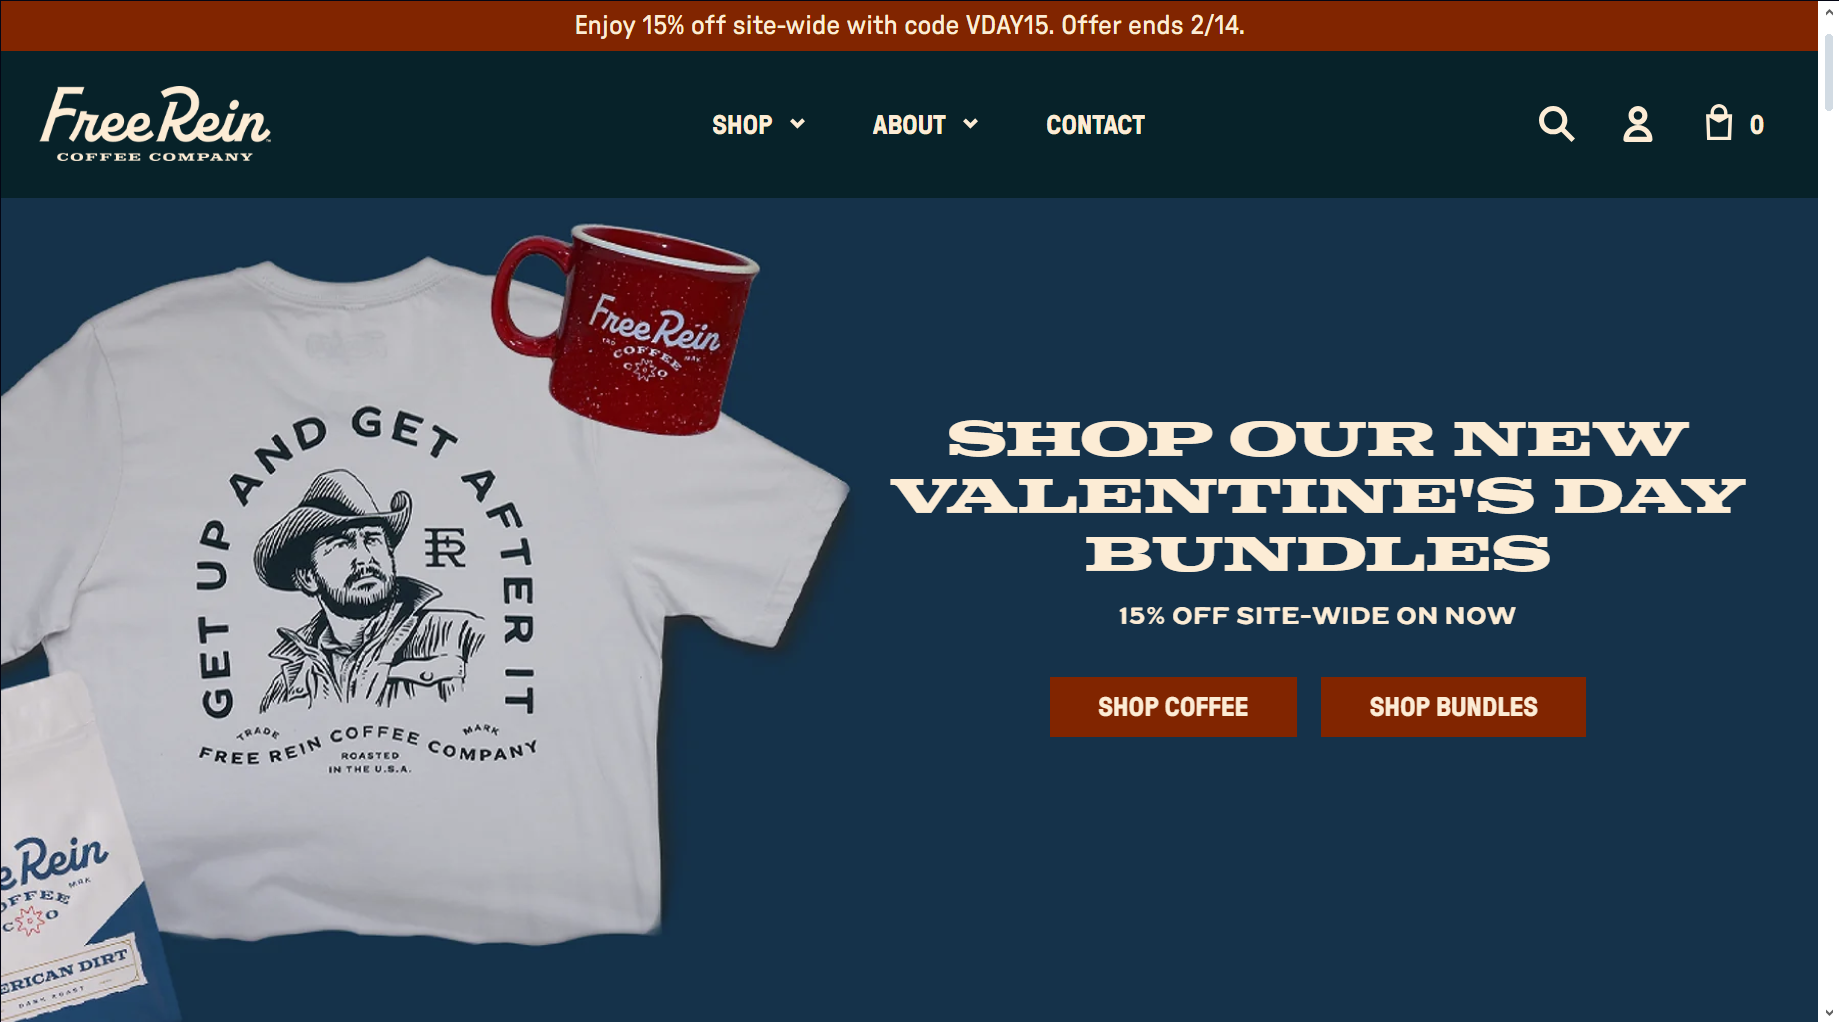 Visit Free Rein for Awesome Valentine’s Day Deals